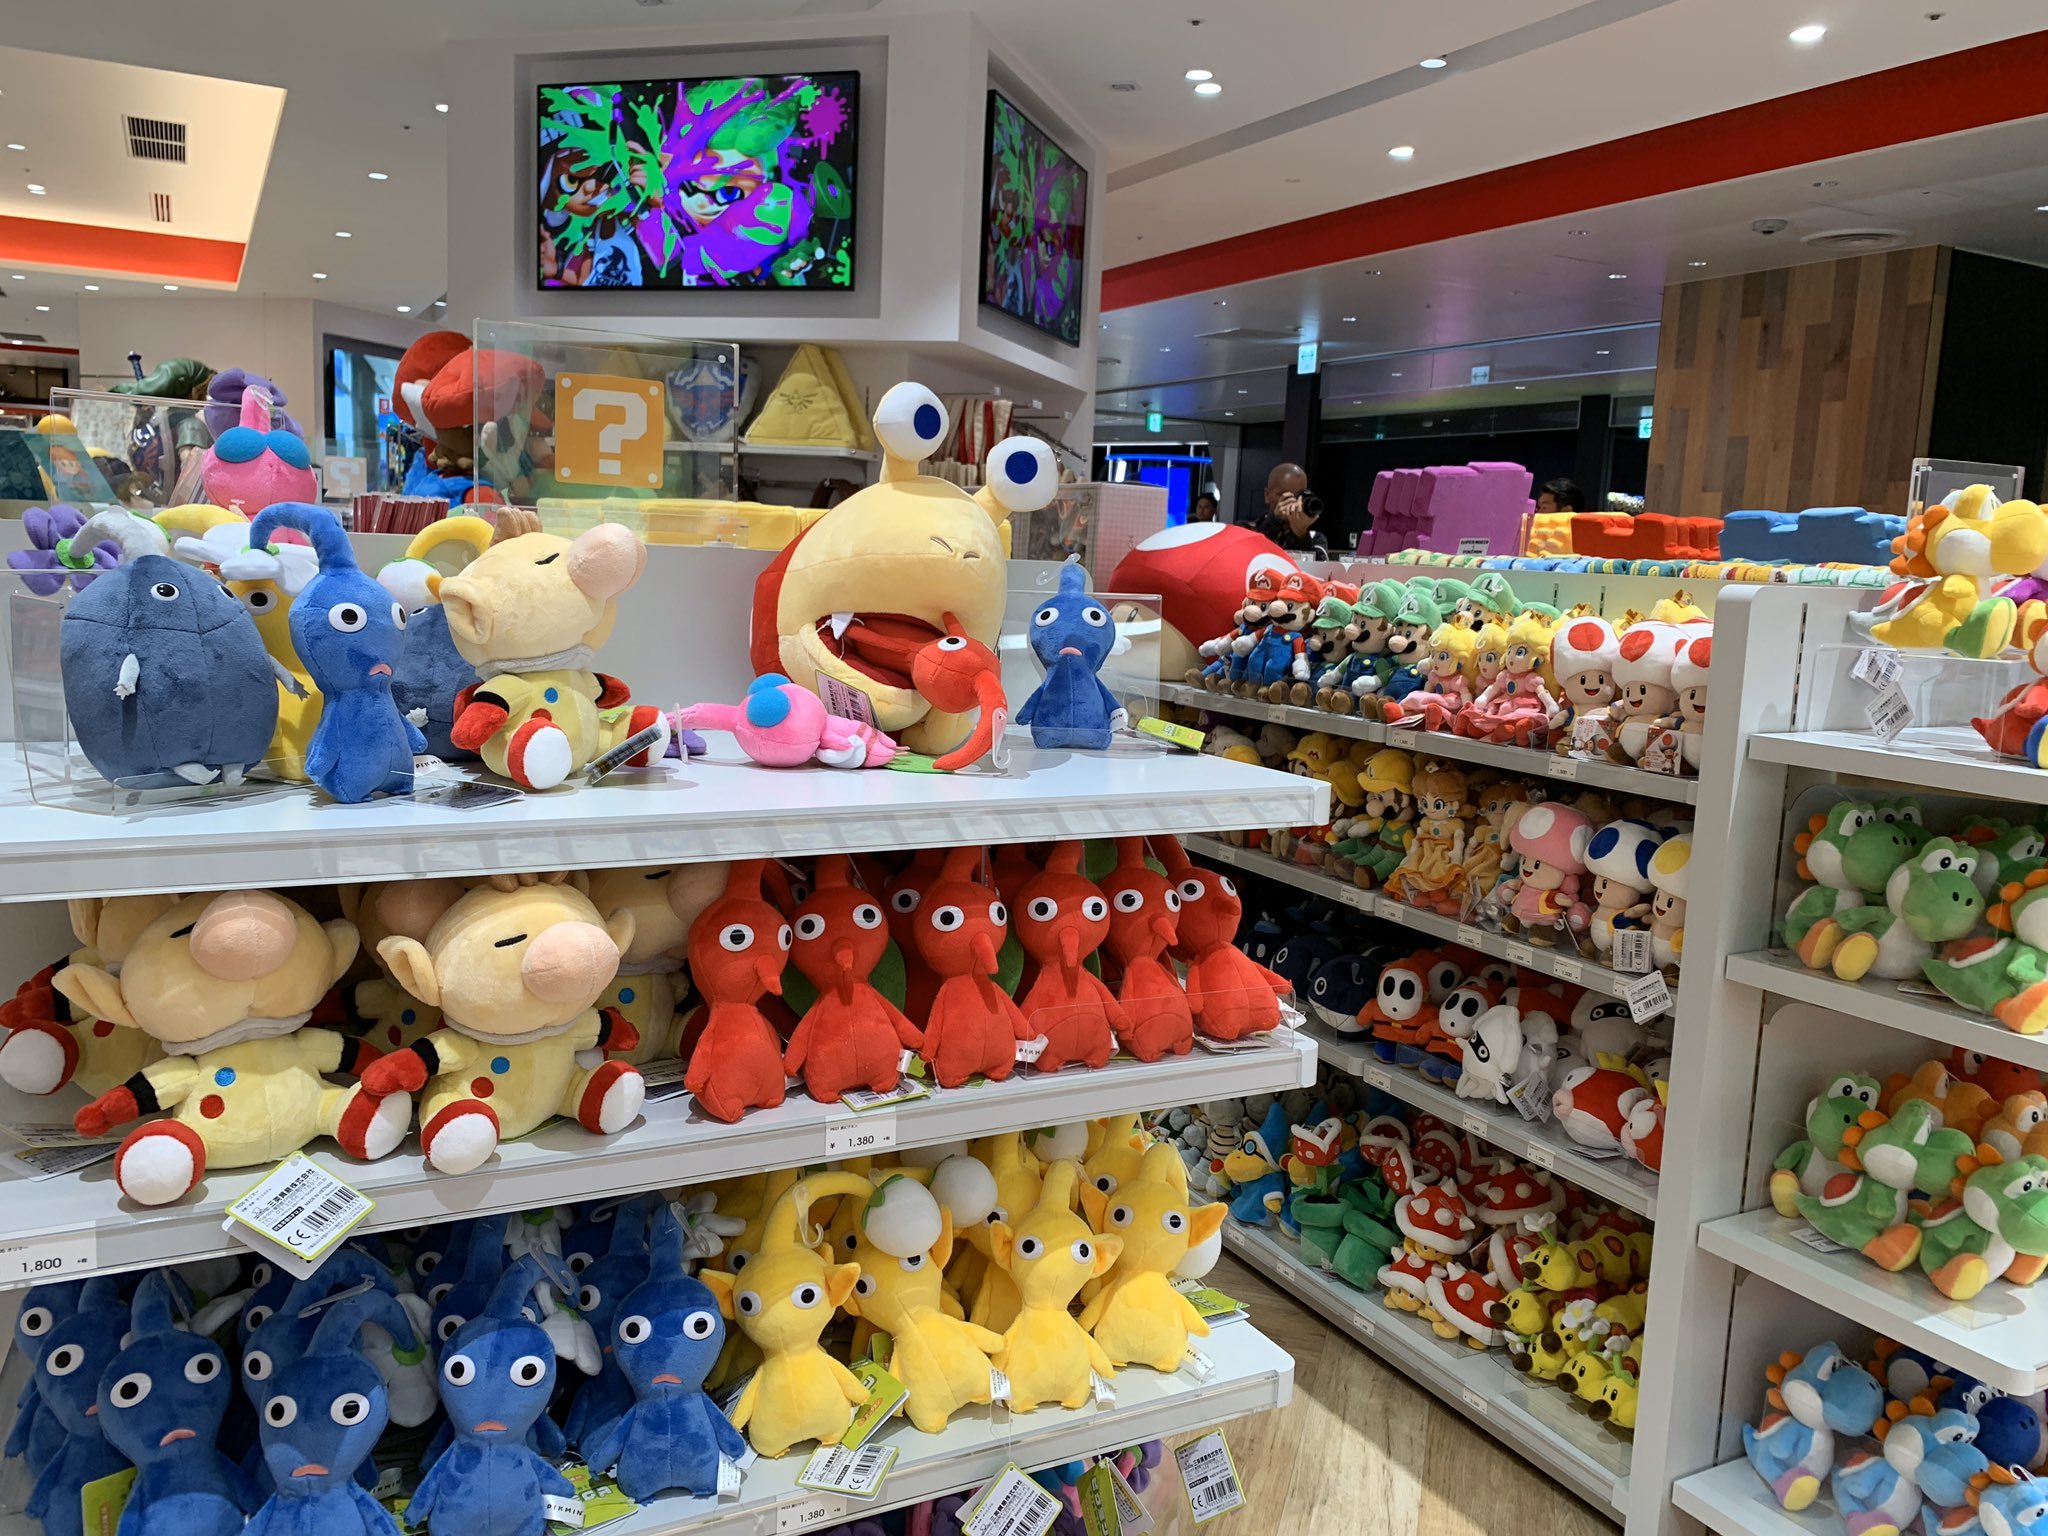 Tranquility Snart bison Gallery: The first images of Nintendo's Tokyo Store | VGC